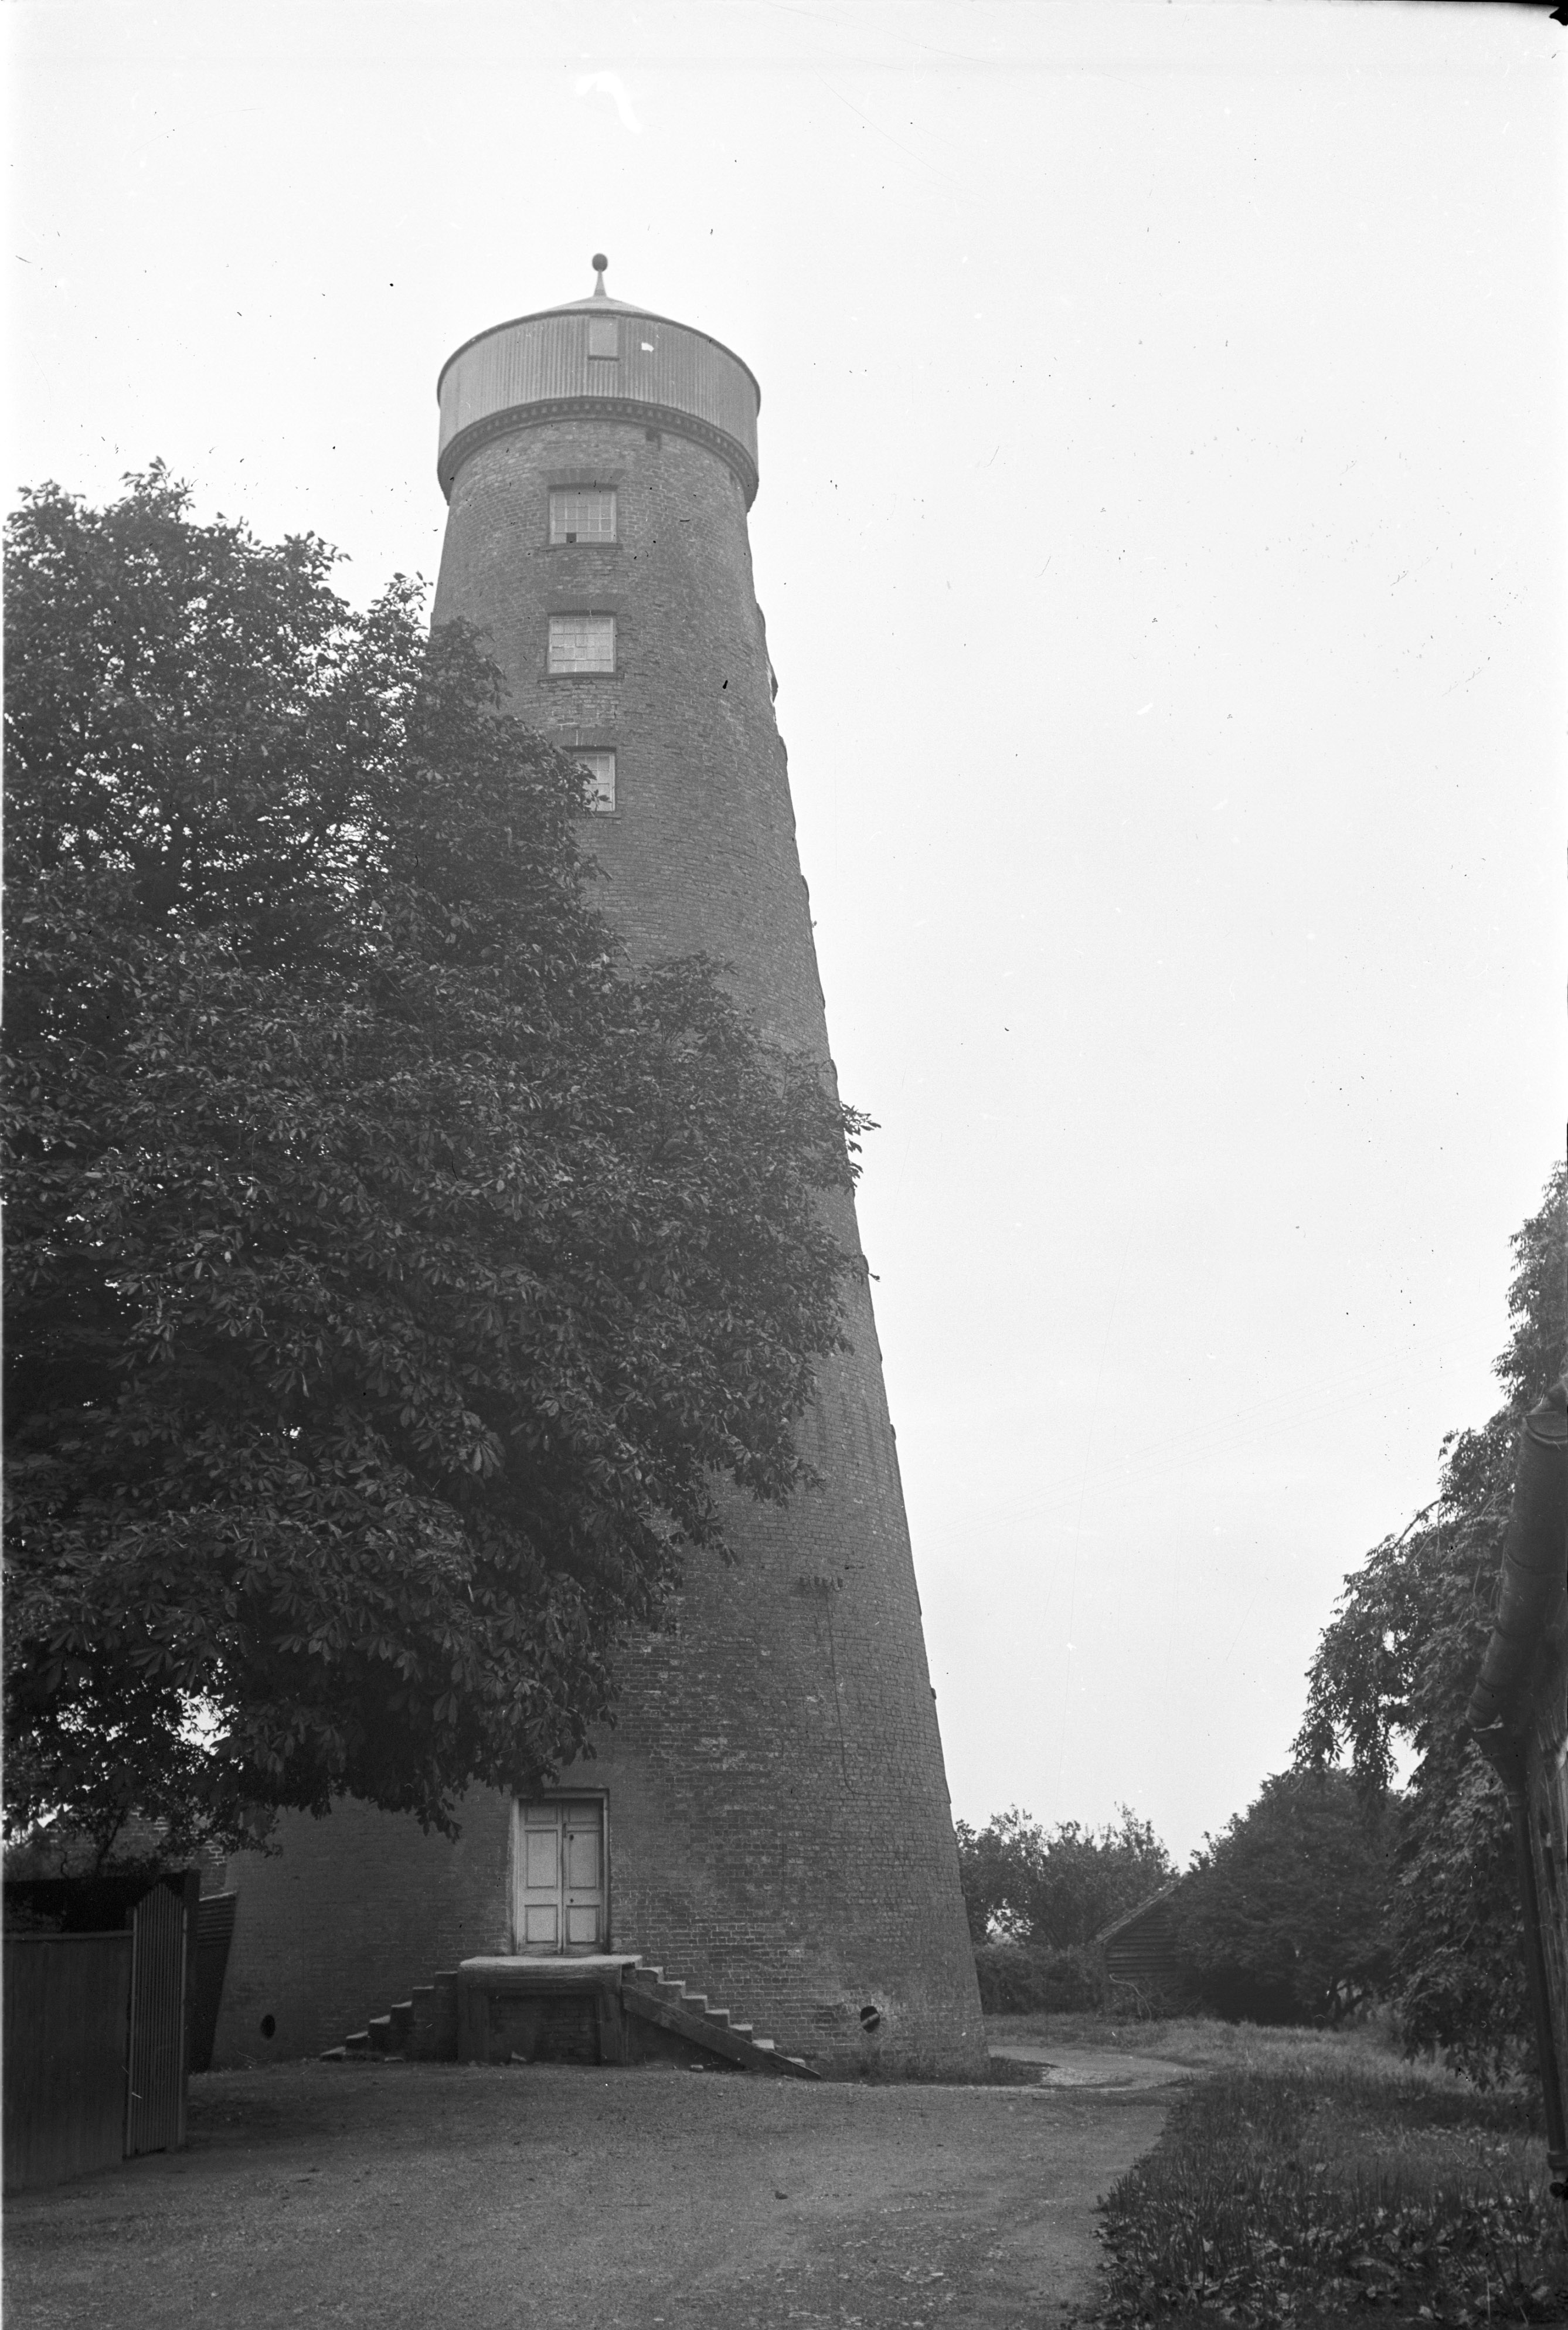 Moulton windmill's workers must have been extremely fit to get all the way to the top (image taken in 1938)